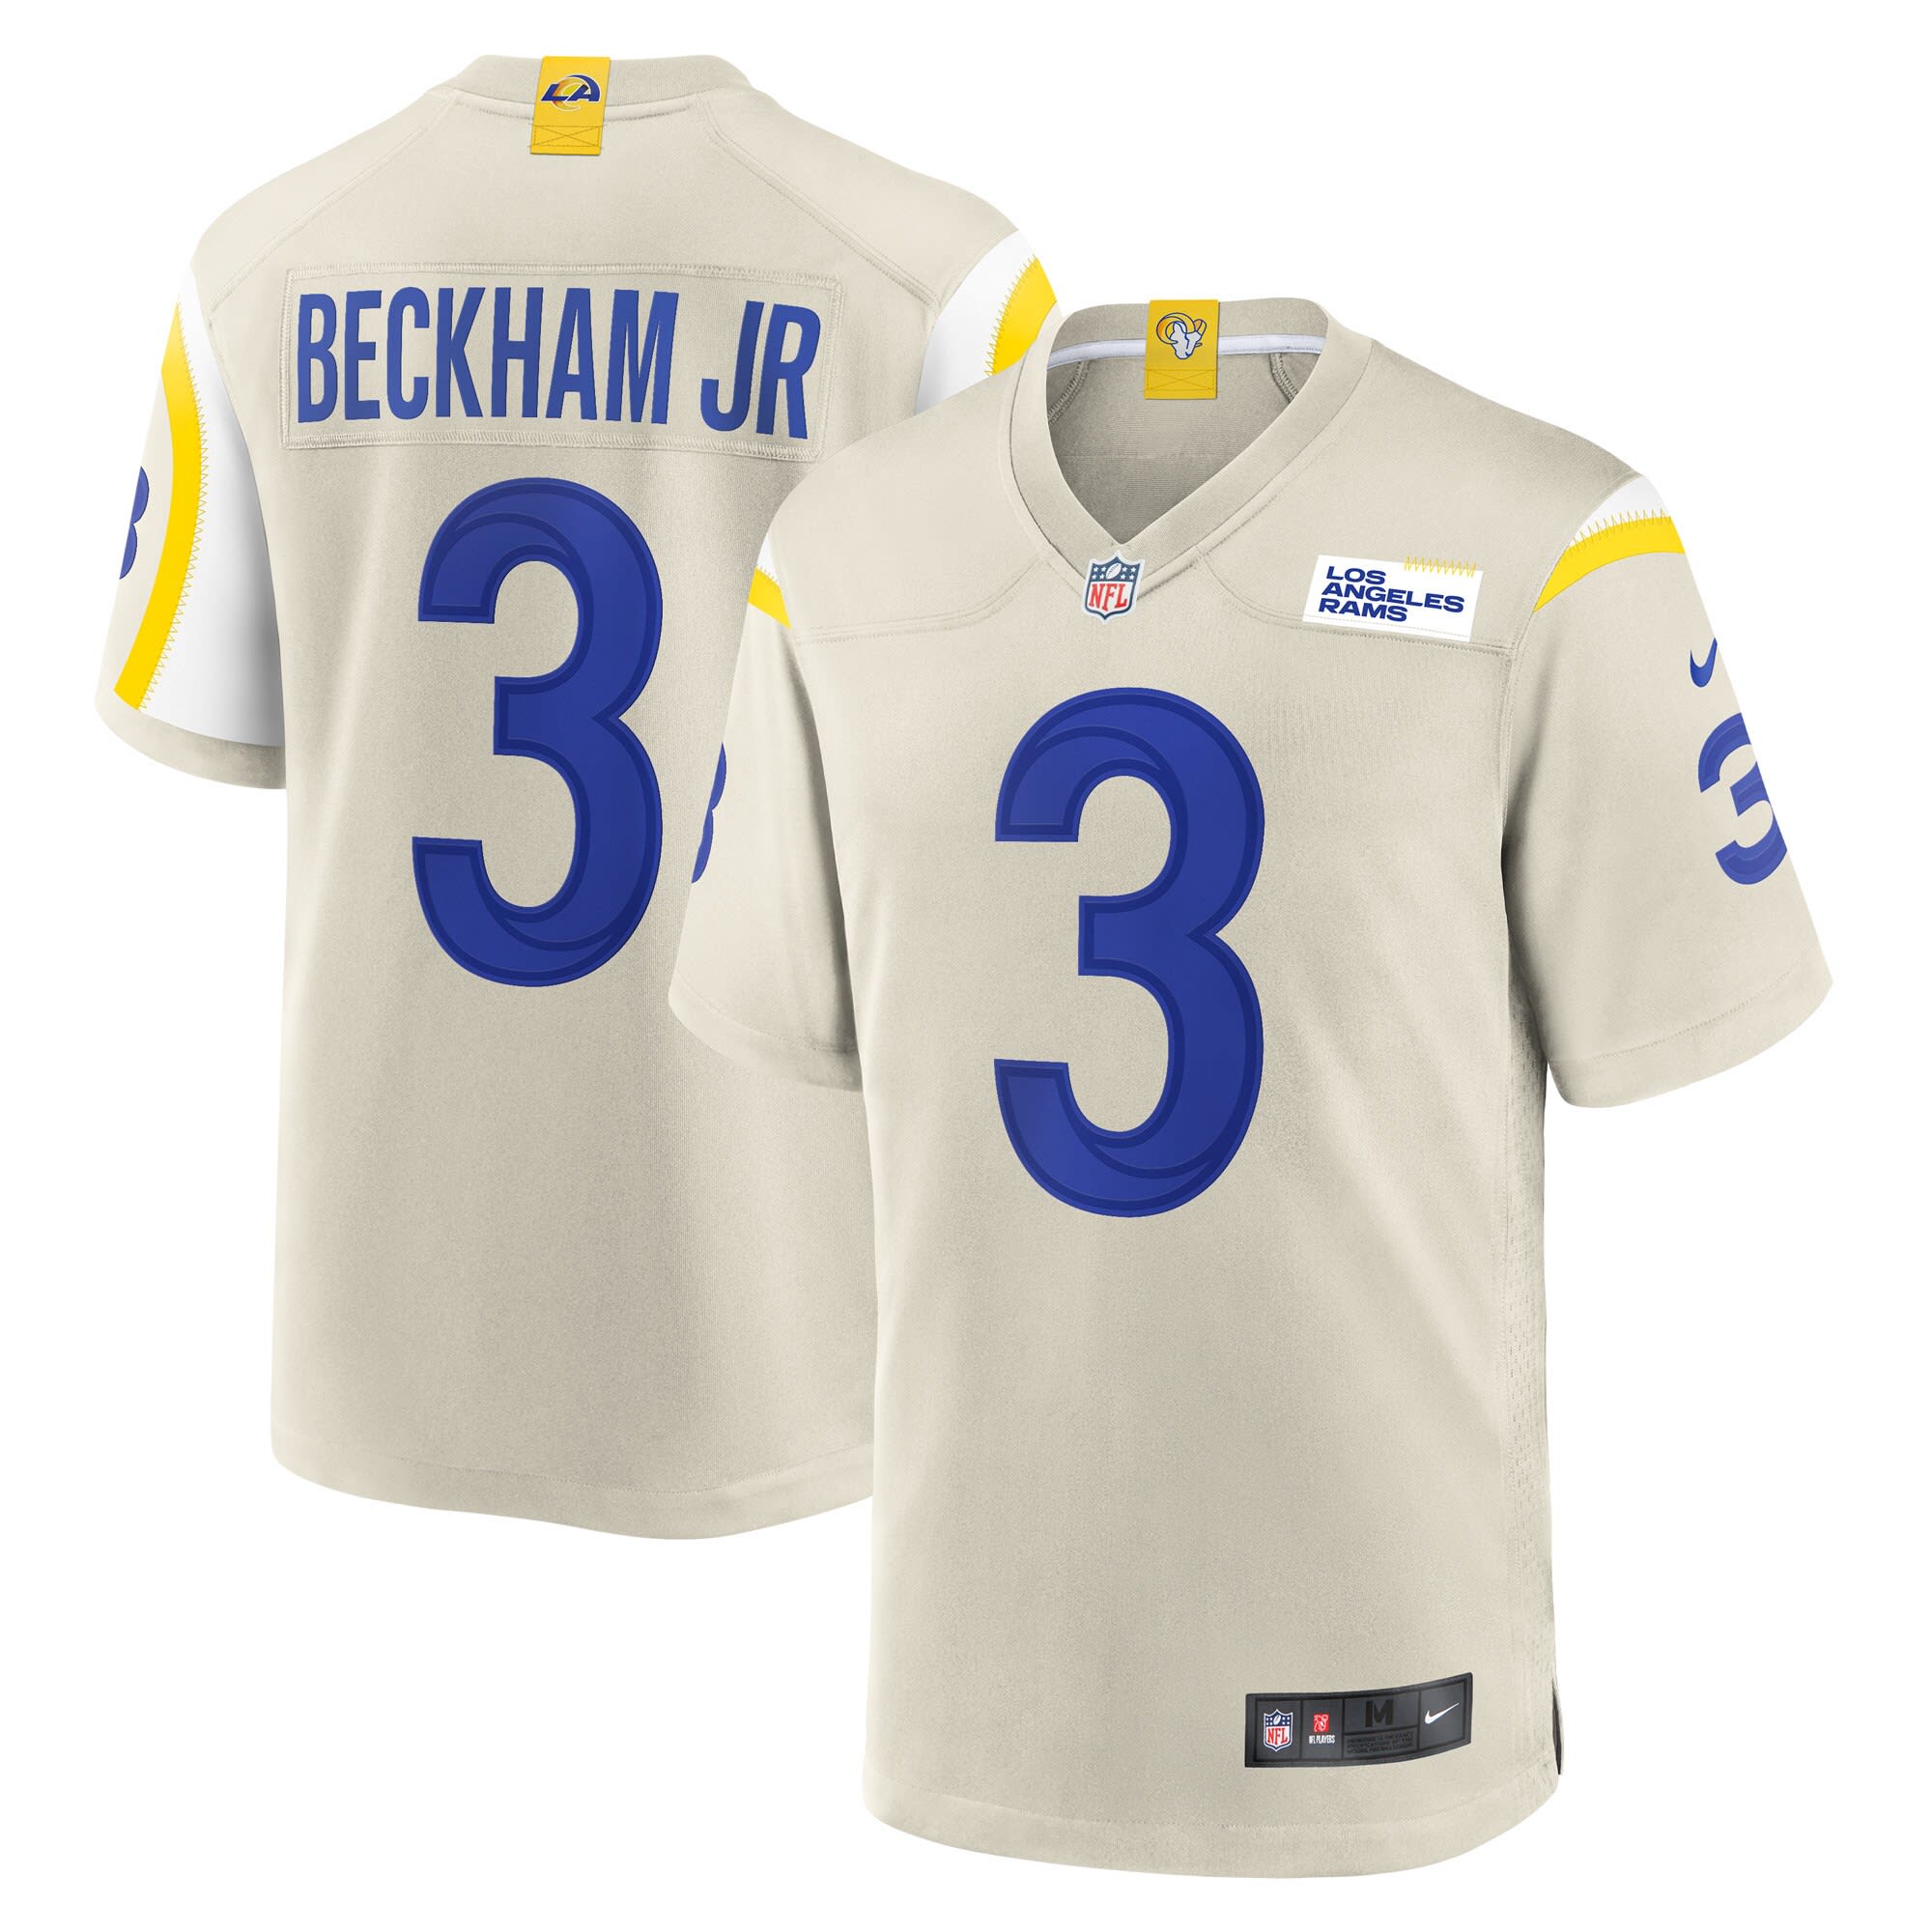 los angeles are nfl players jerseys stitched